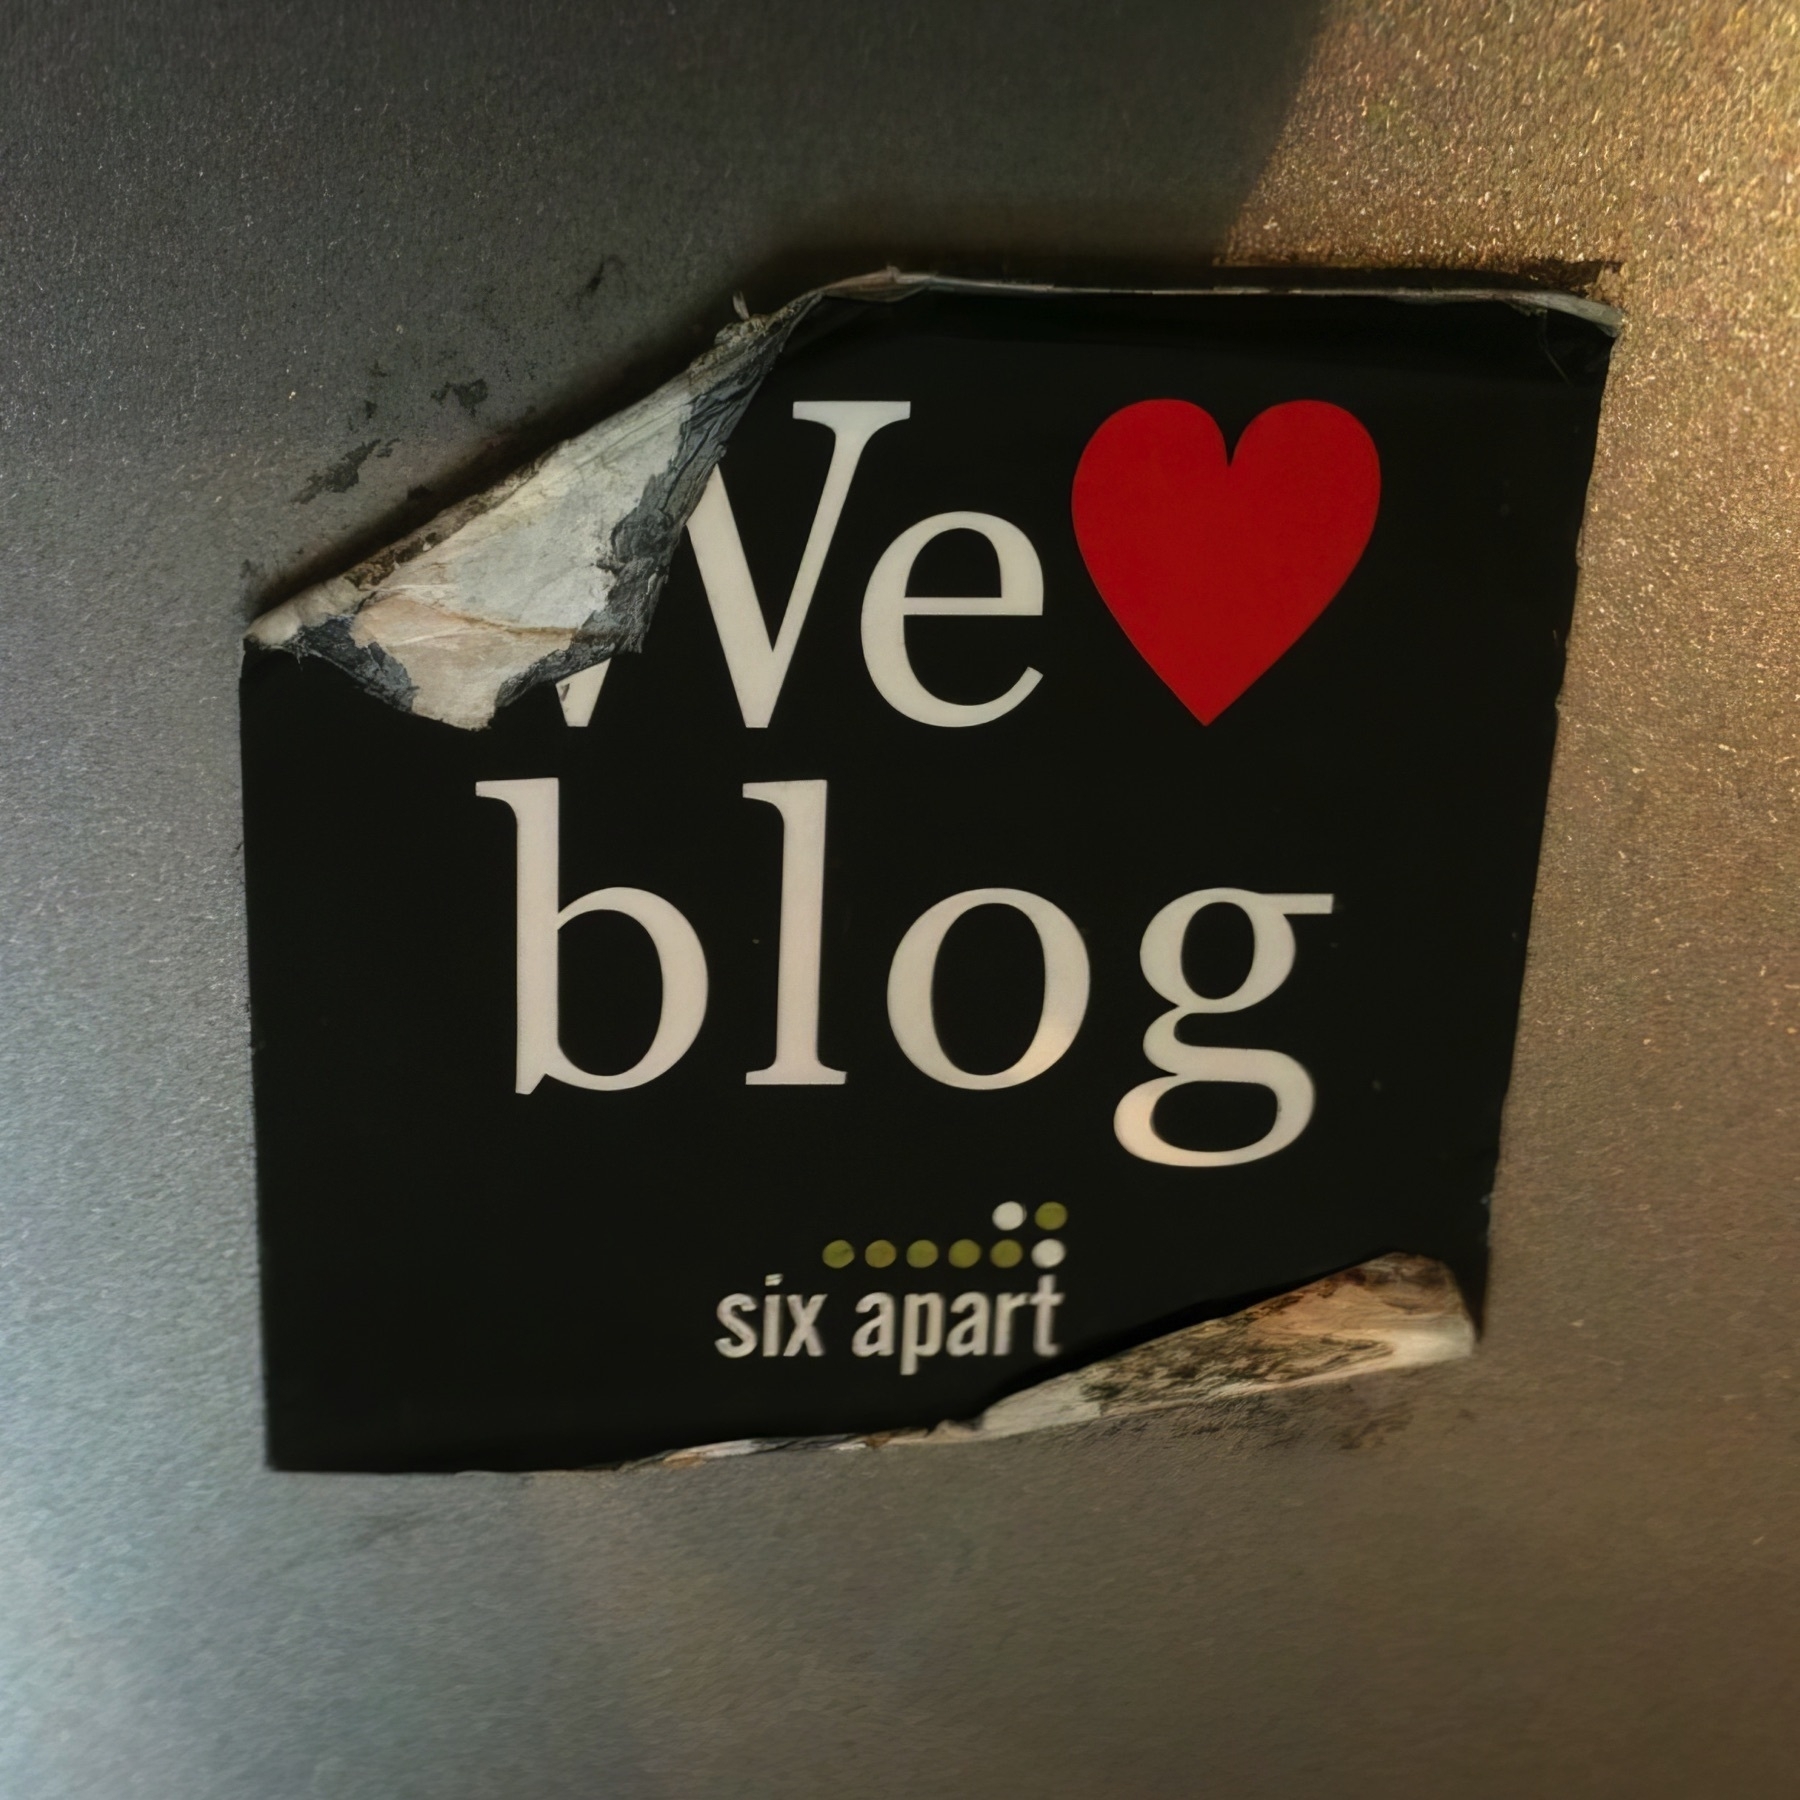 A “We Love Blog” sticker from Six Apart in 2010.